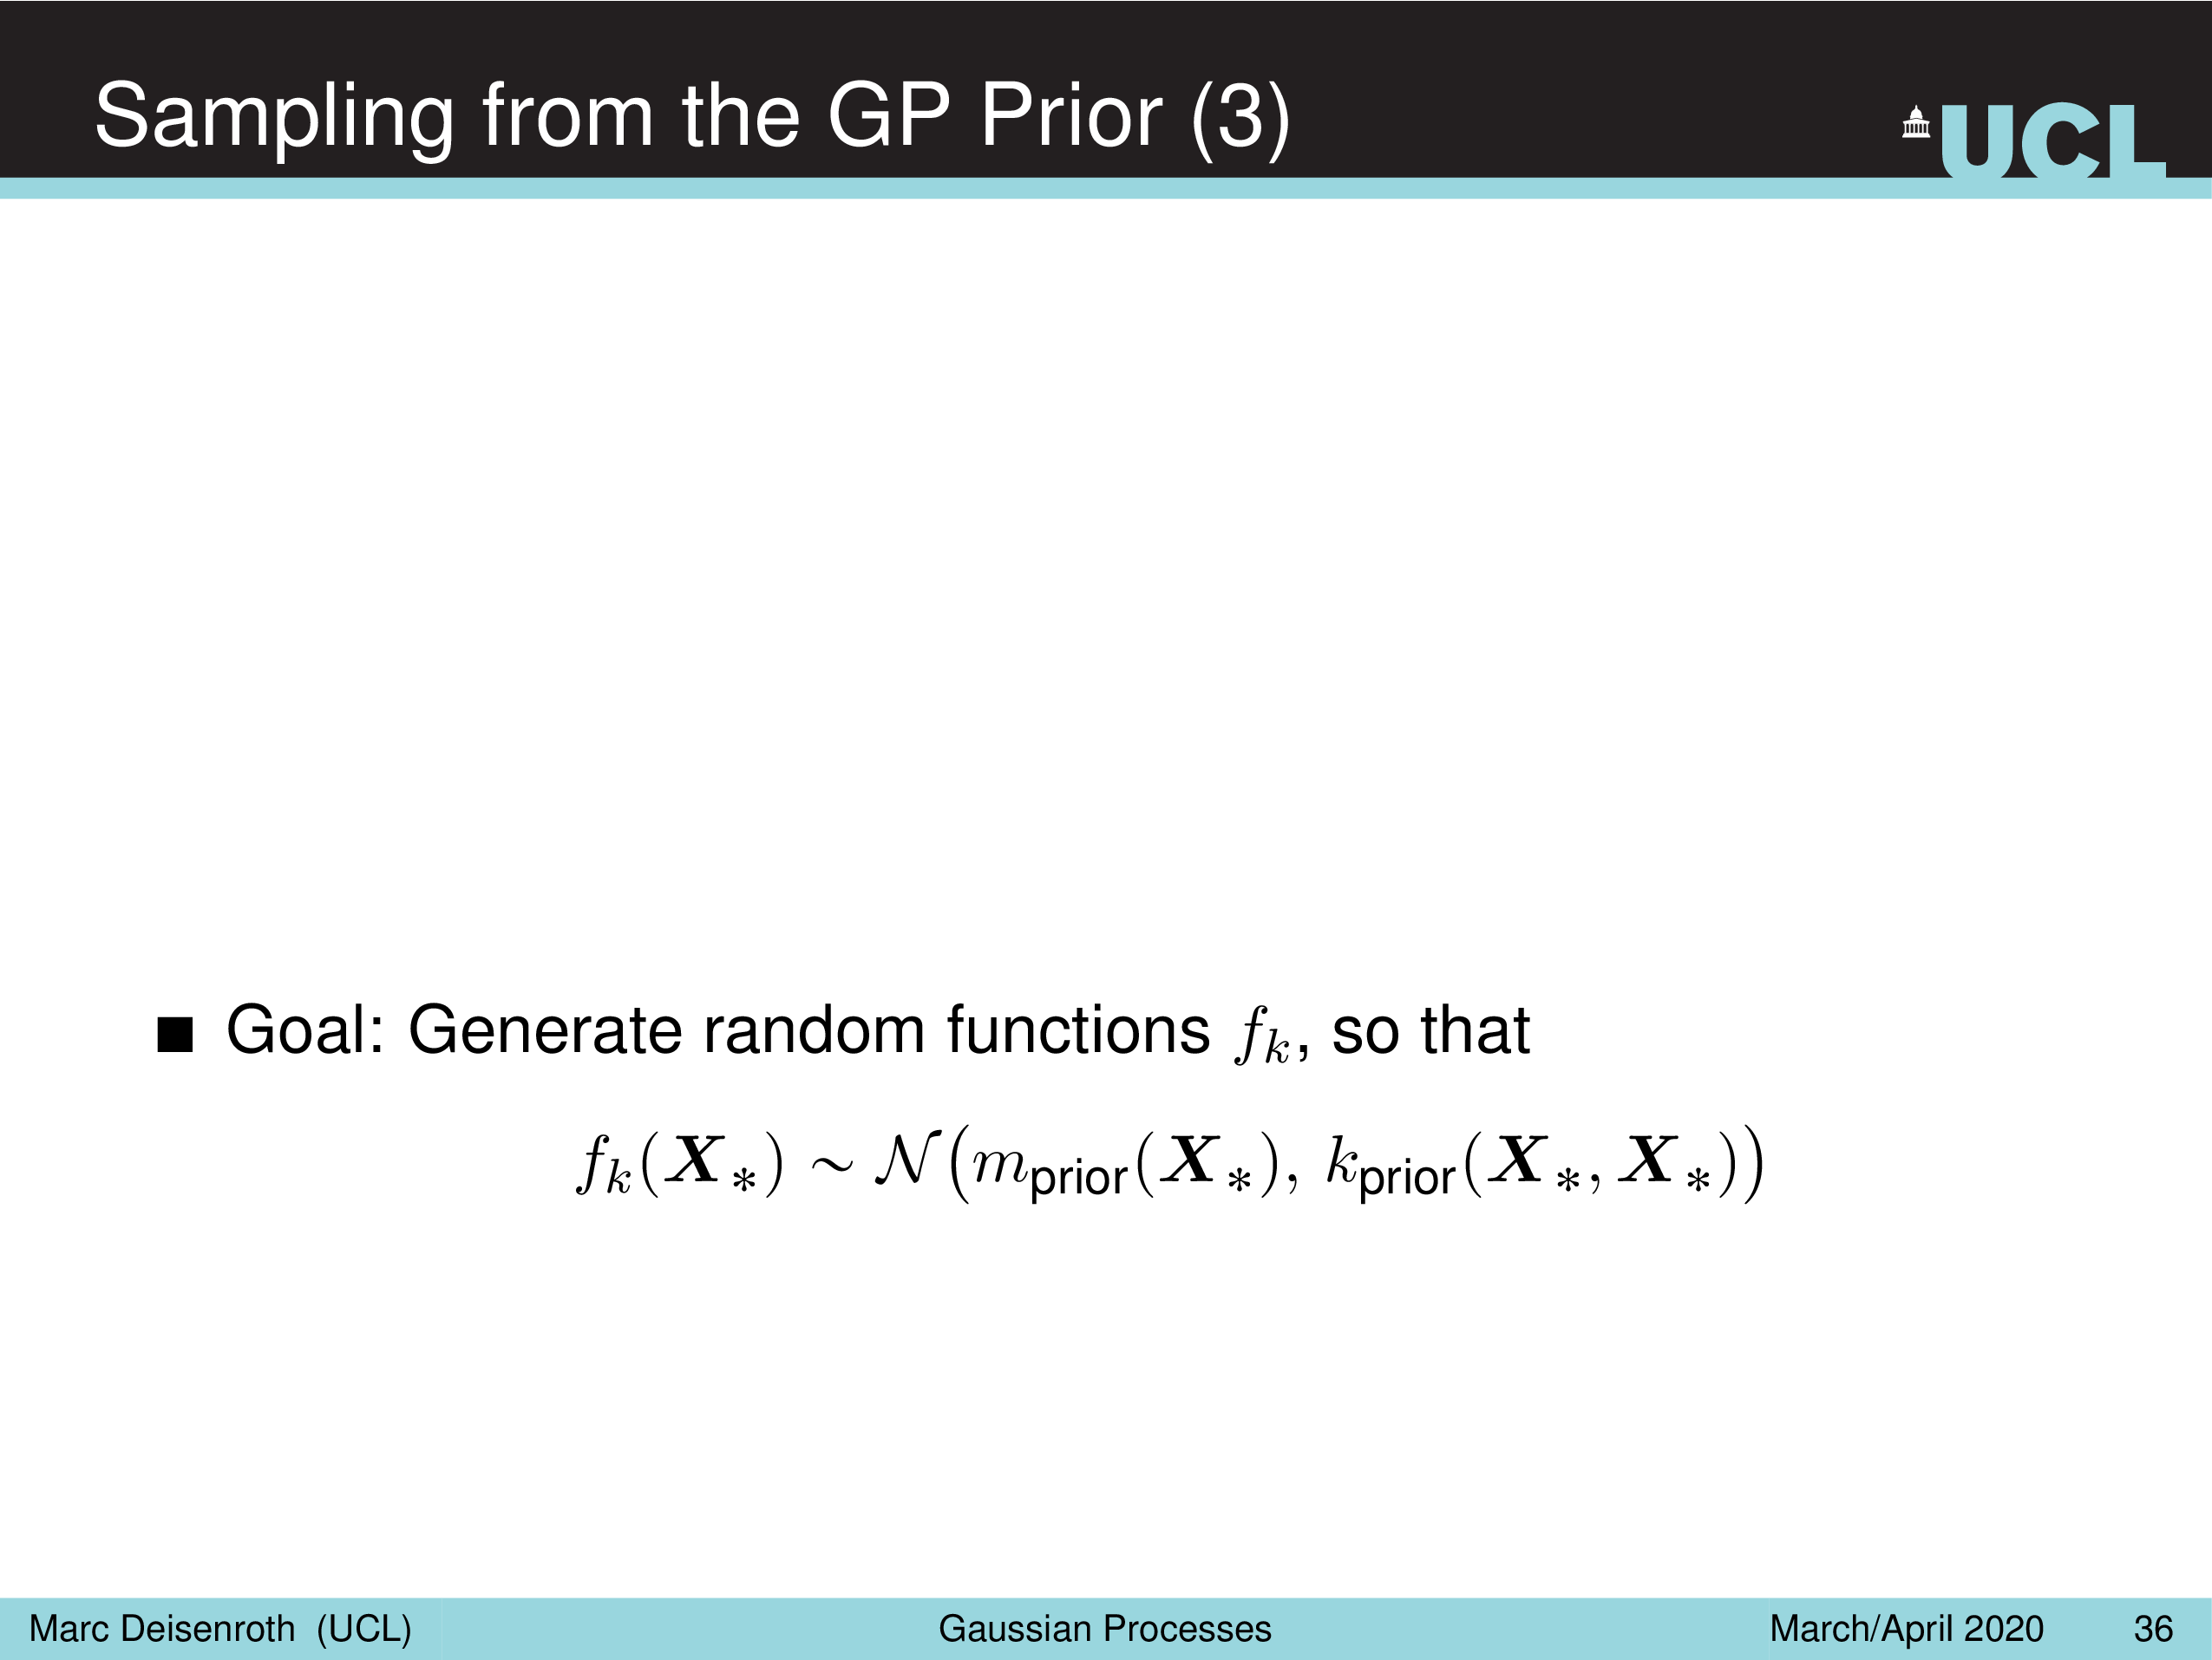 lecture_gp_annotated1_079